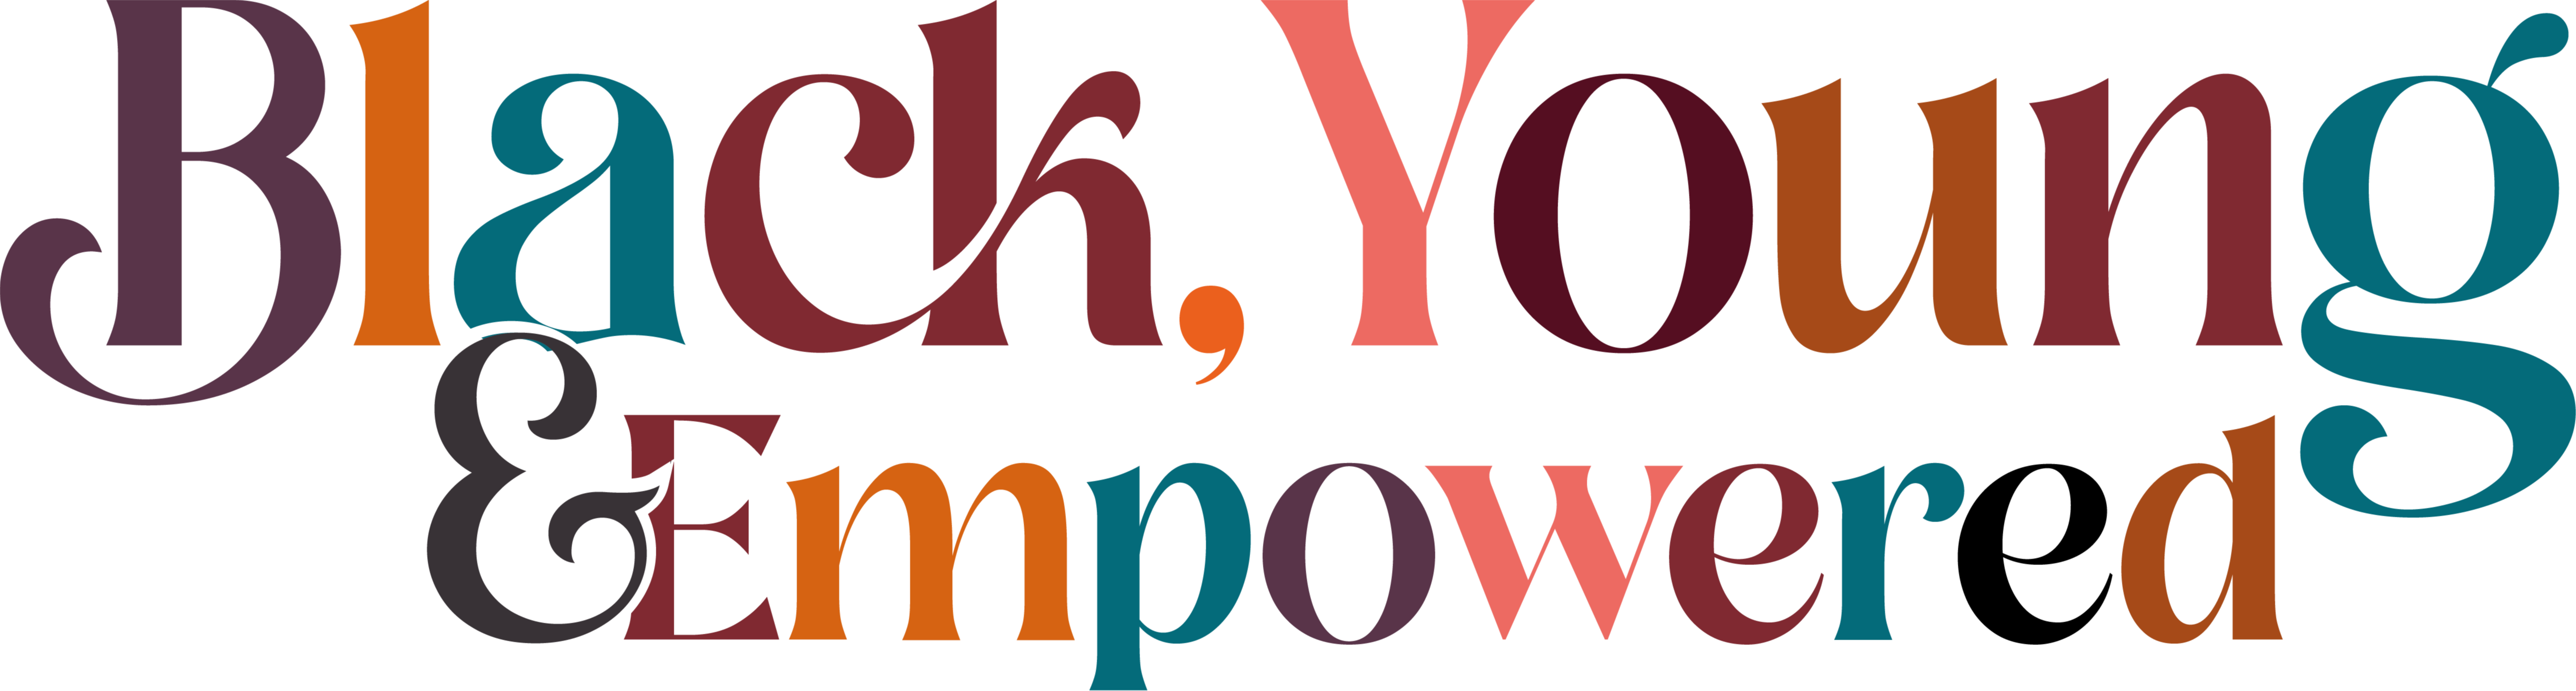 Black Young and Empowered logo